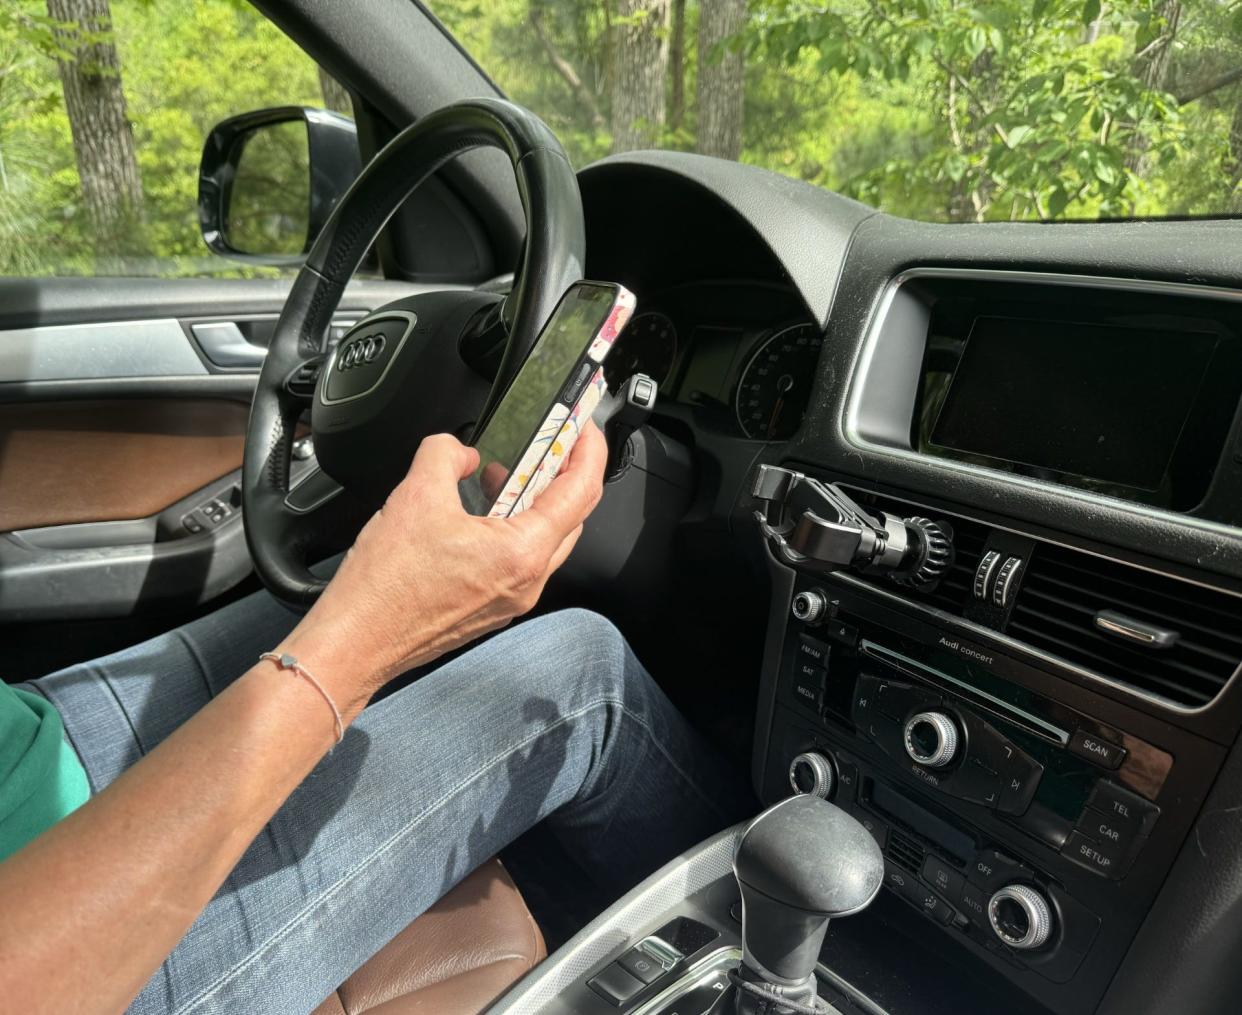 How significant is the problem of texting while driving in Wilmington? Wilmington police data and insights from Public Information Officer Lt. Greg Willett shed light on the issue locally.